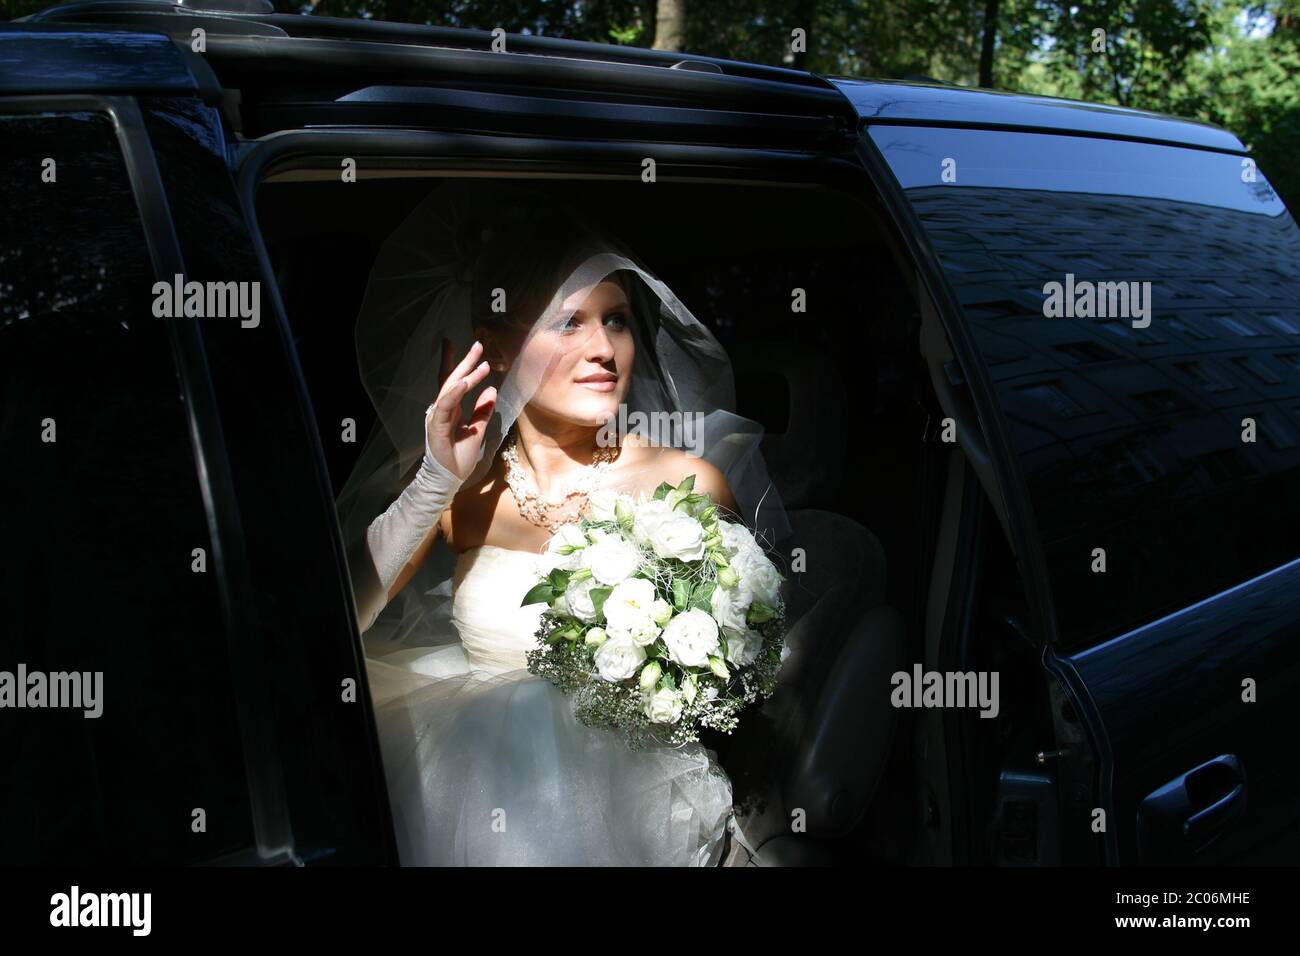 The beautiful bride in a car Stock Photo